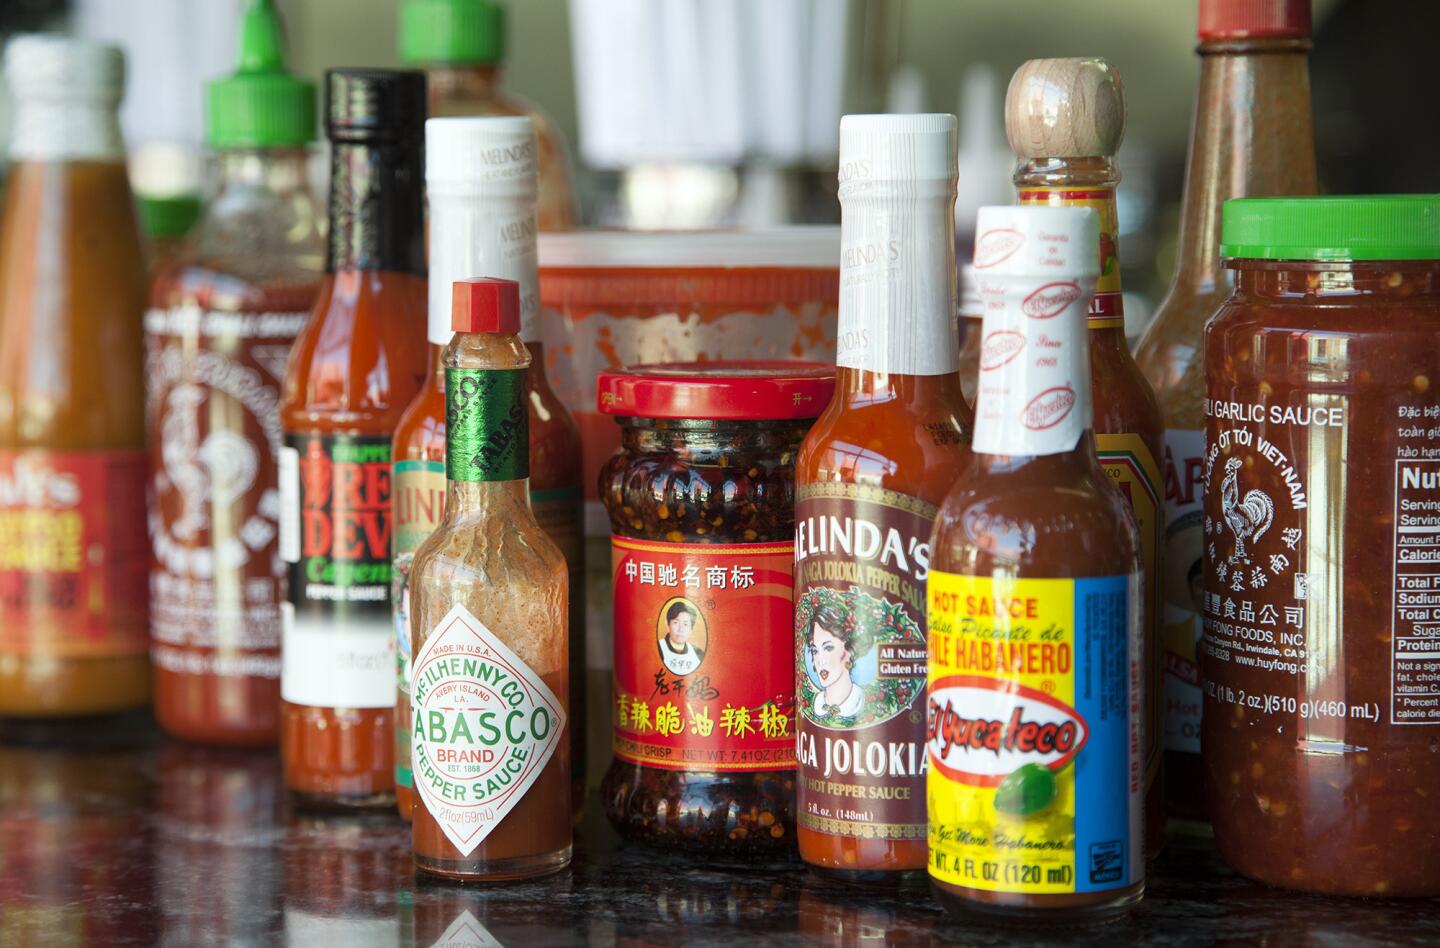 L.A. Times restaurant critic Jonathan Gold, chef Roy Choi and chef Alvin Cailan taste hot sauces to see if they can find a new personal favorite.